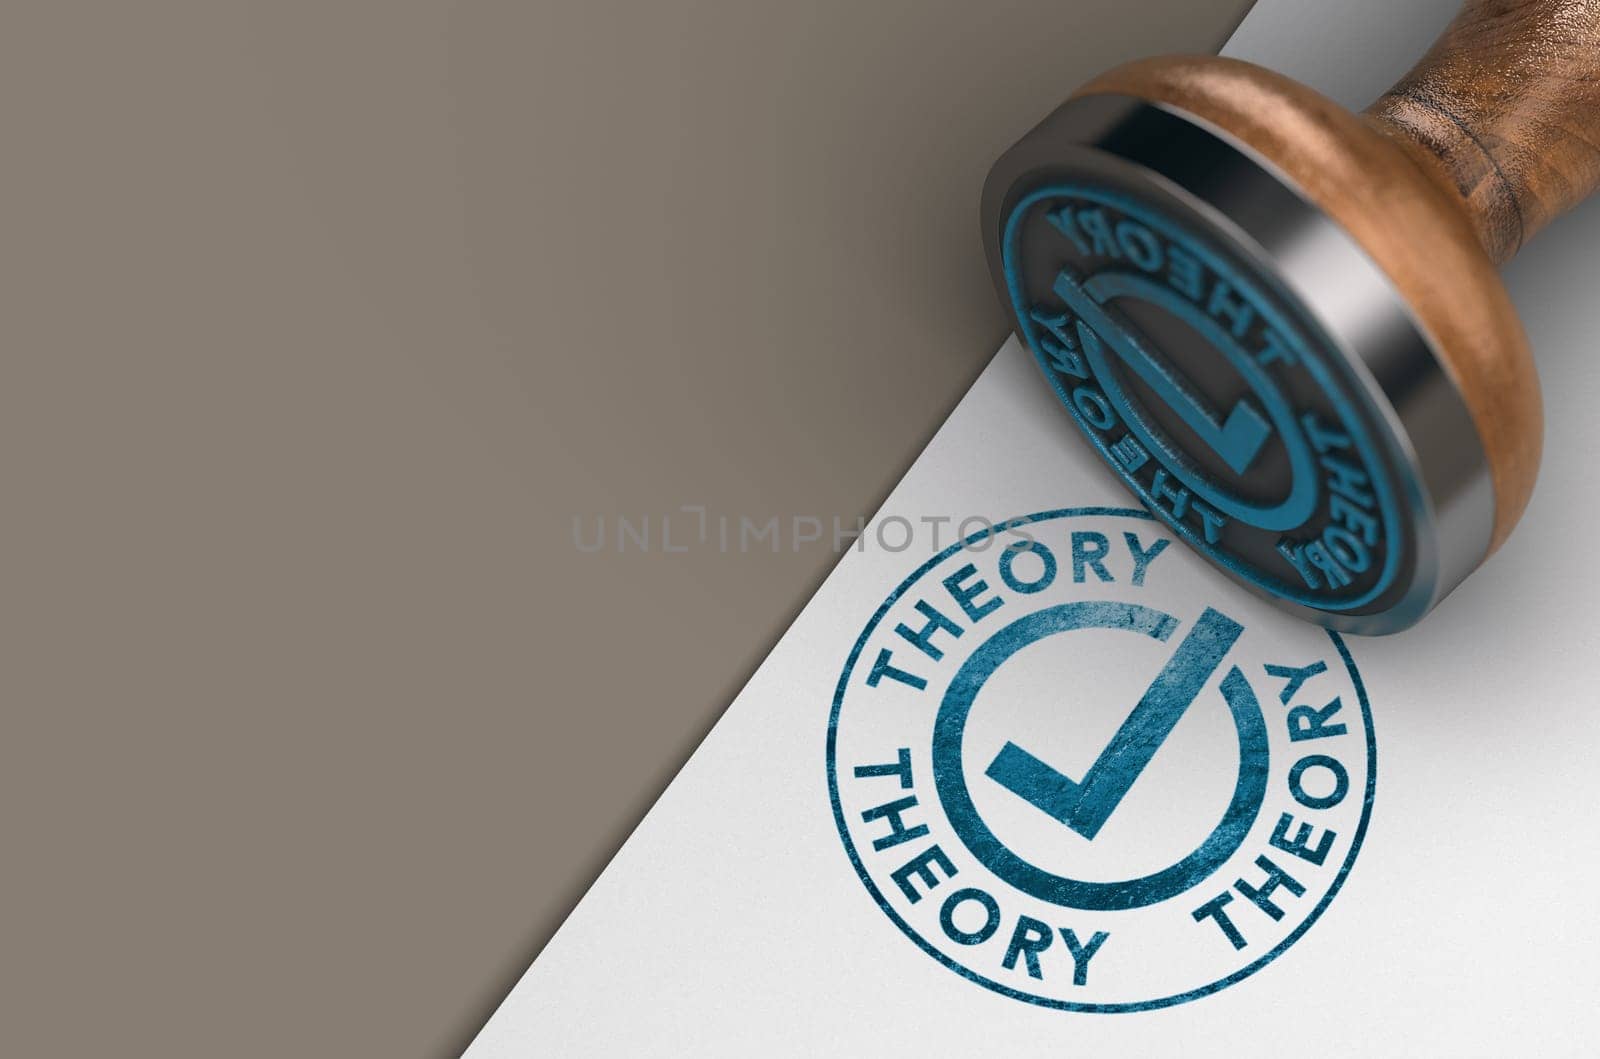 Word theory and check mark stamped on white paper sheet with wooden rubber stamp and copy space. 3D illustration.